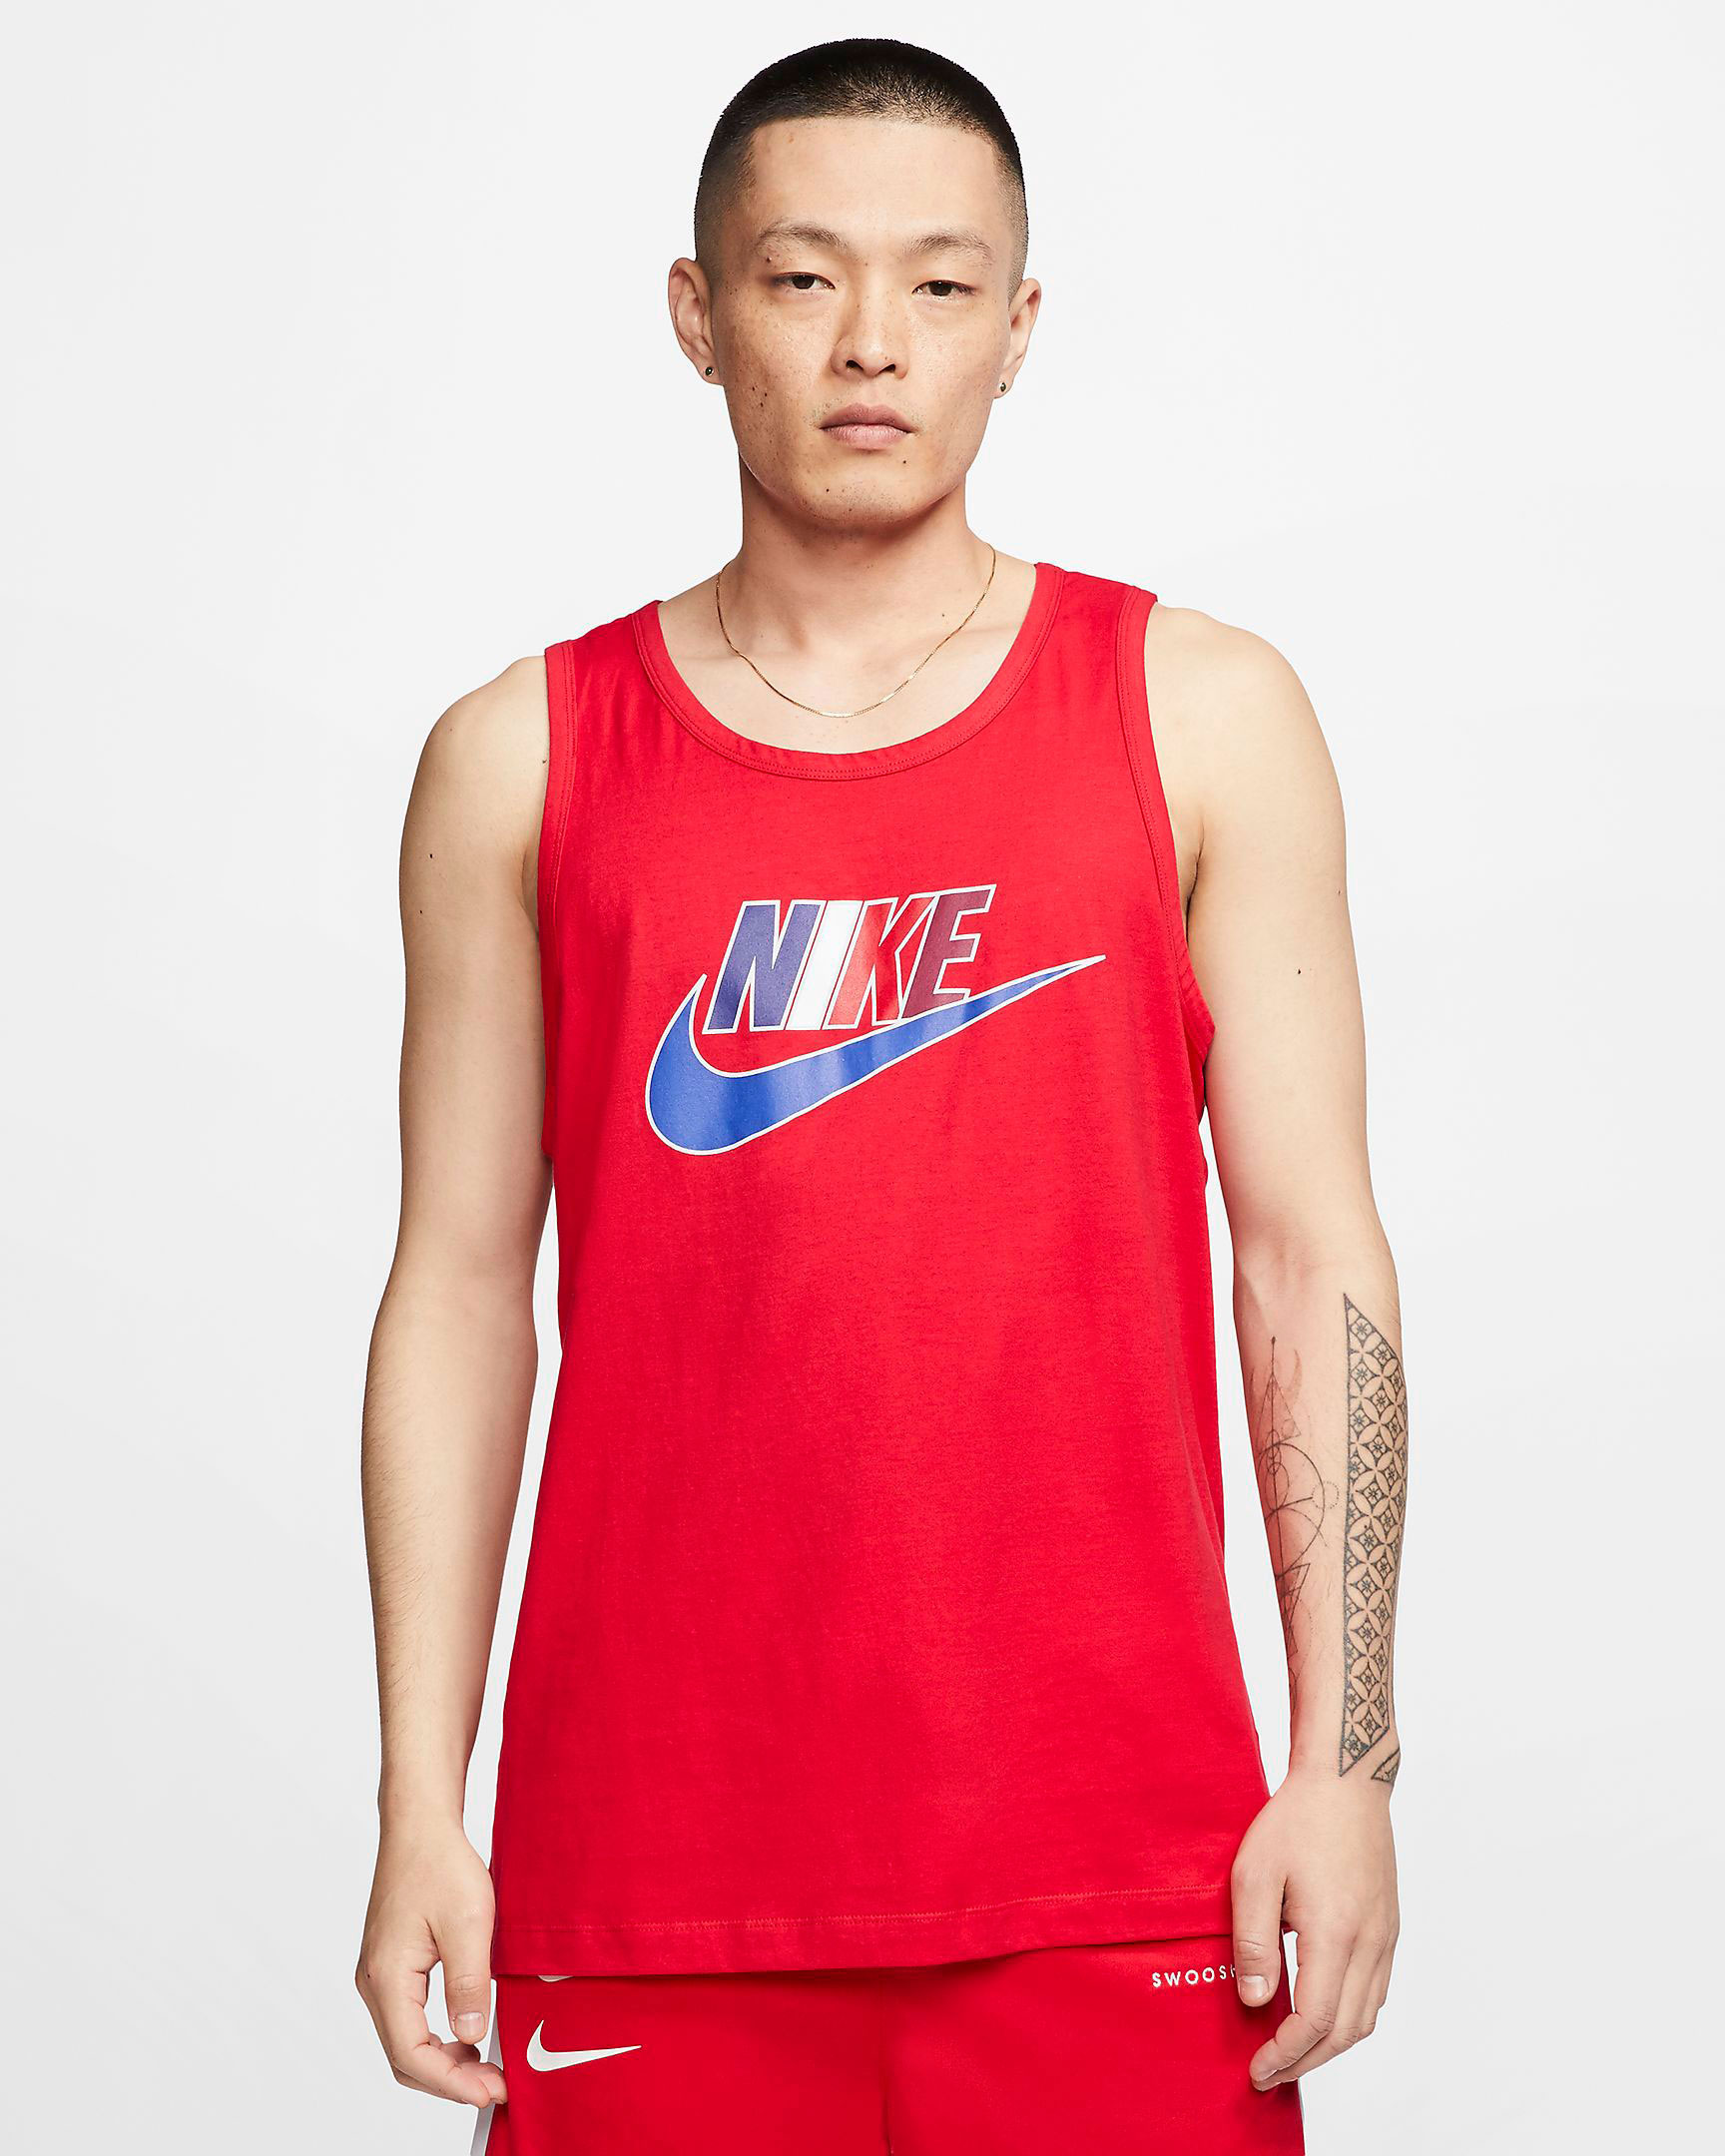 nike-kybrid-s2-what-the-usa-tank-1